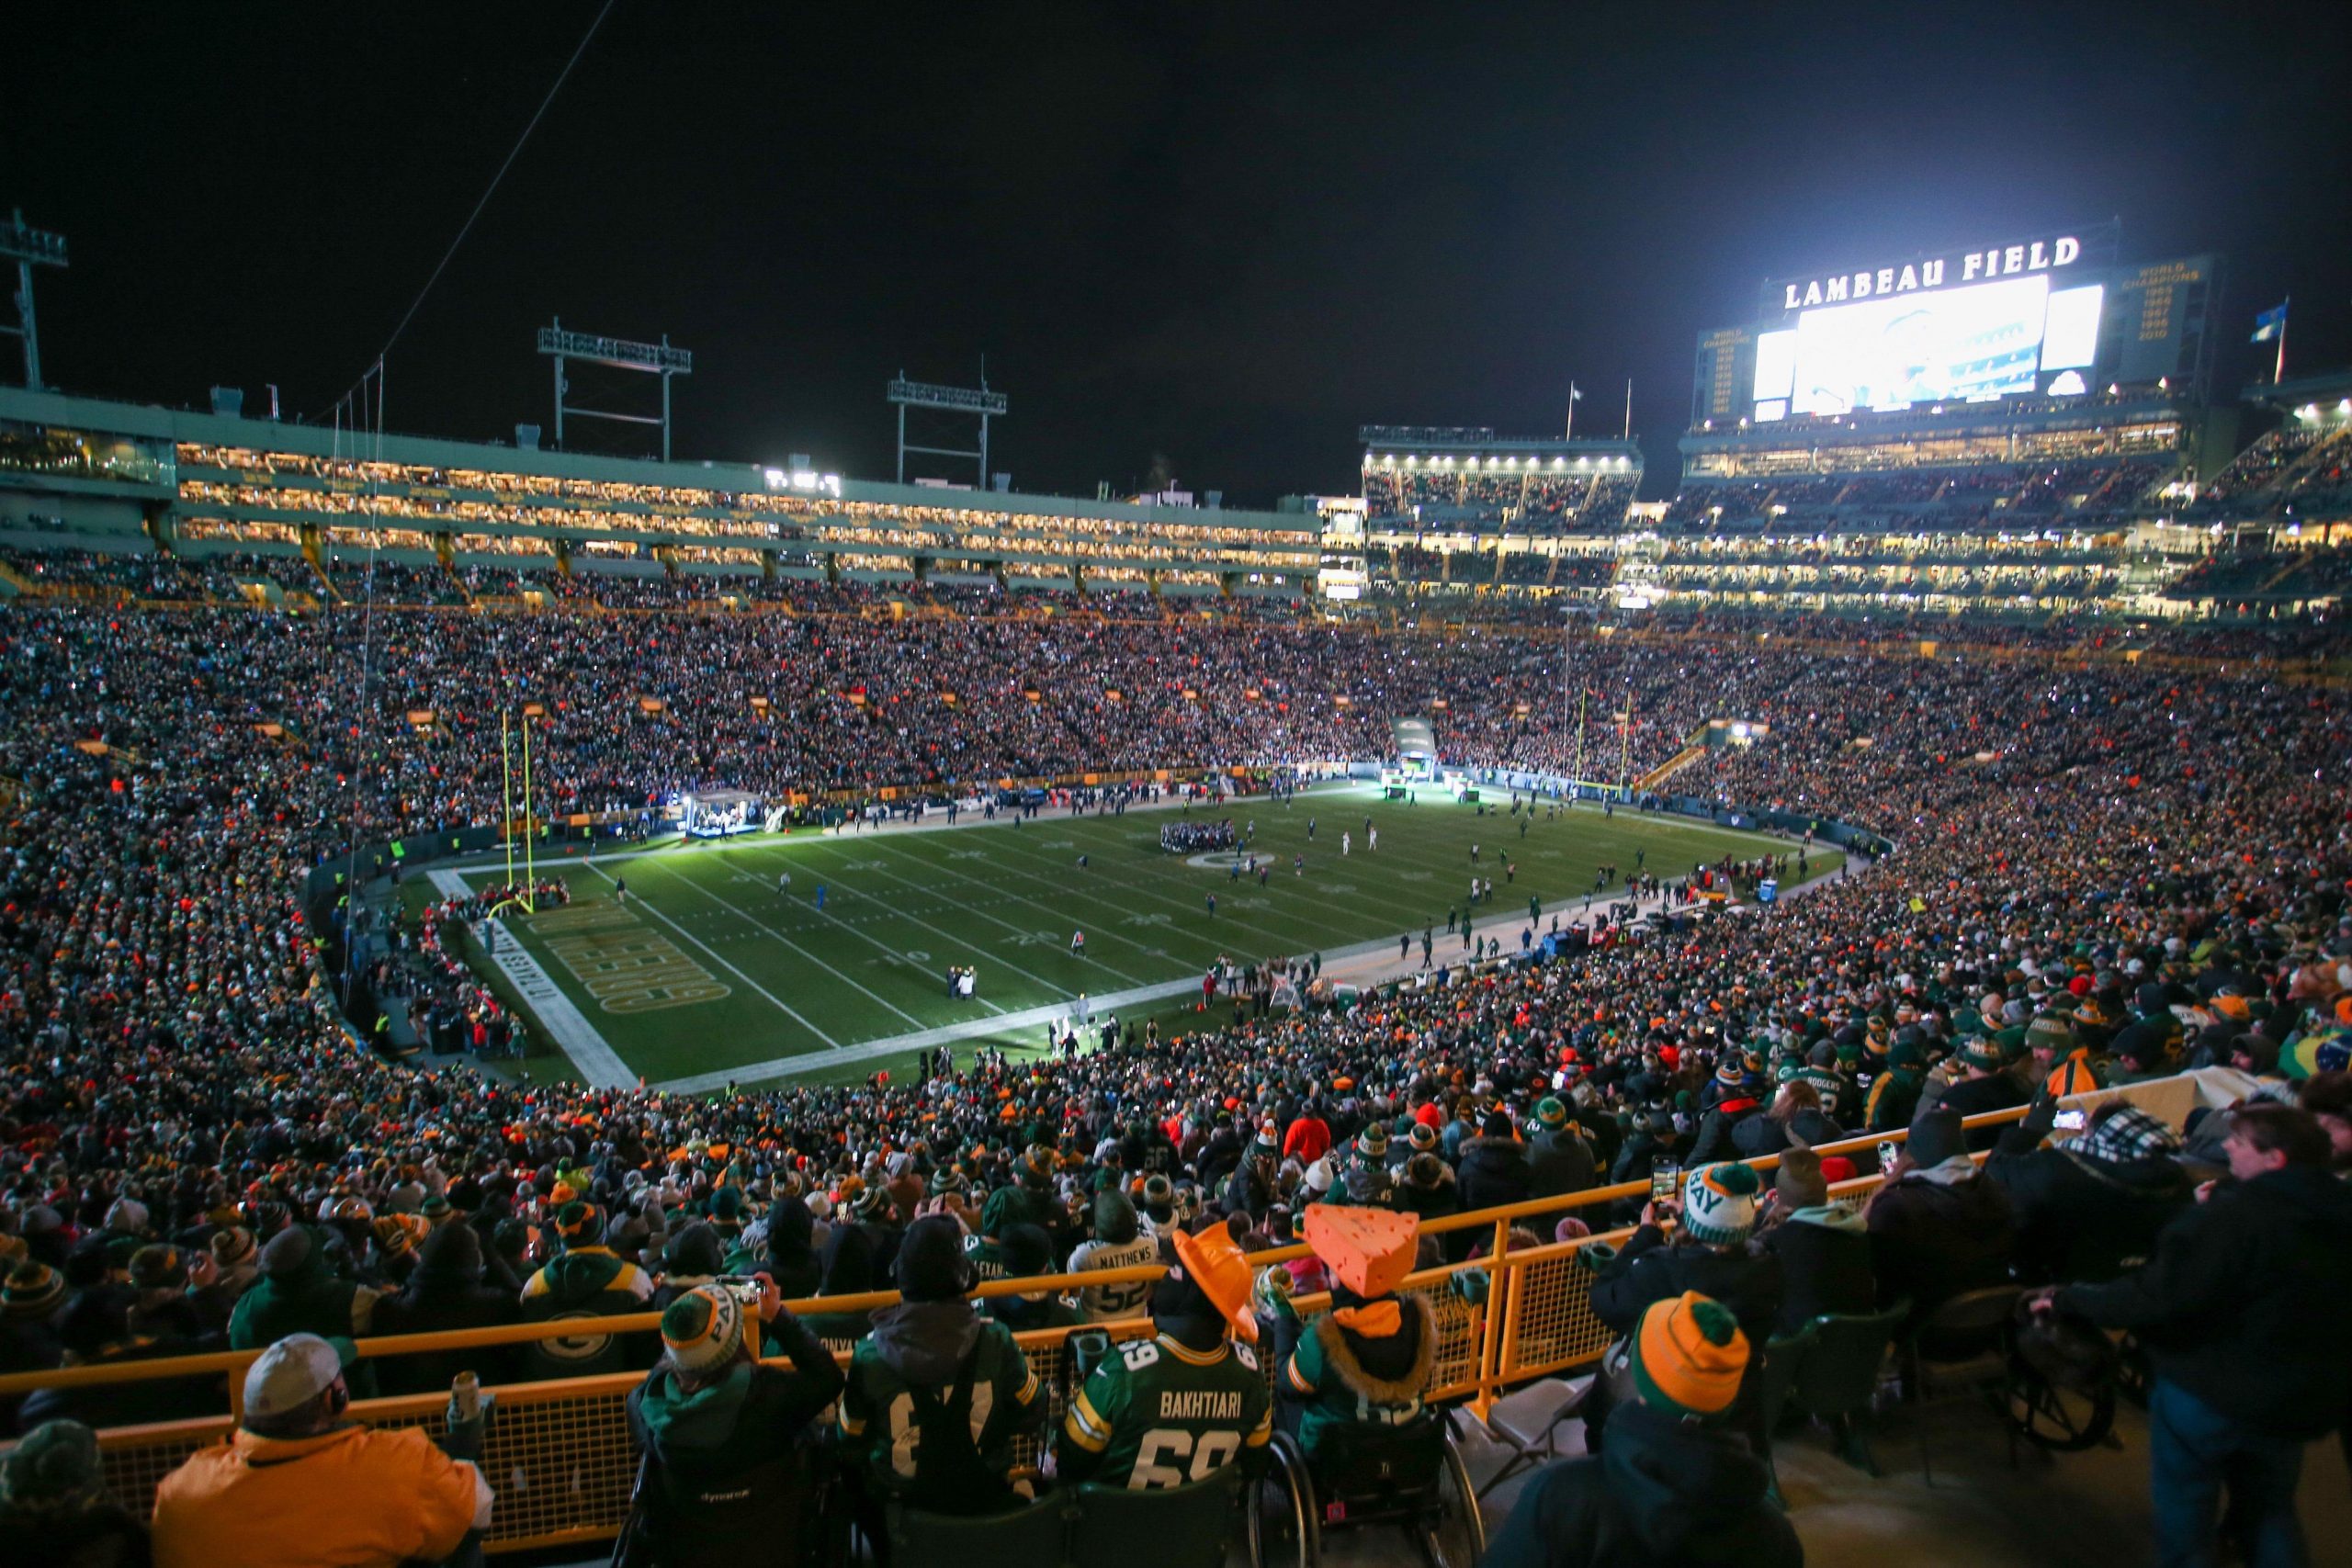 What is the temperature at Lambeau Field for Green Bay Packers vs Tennessee Titans NFL 2022 TNF game?